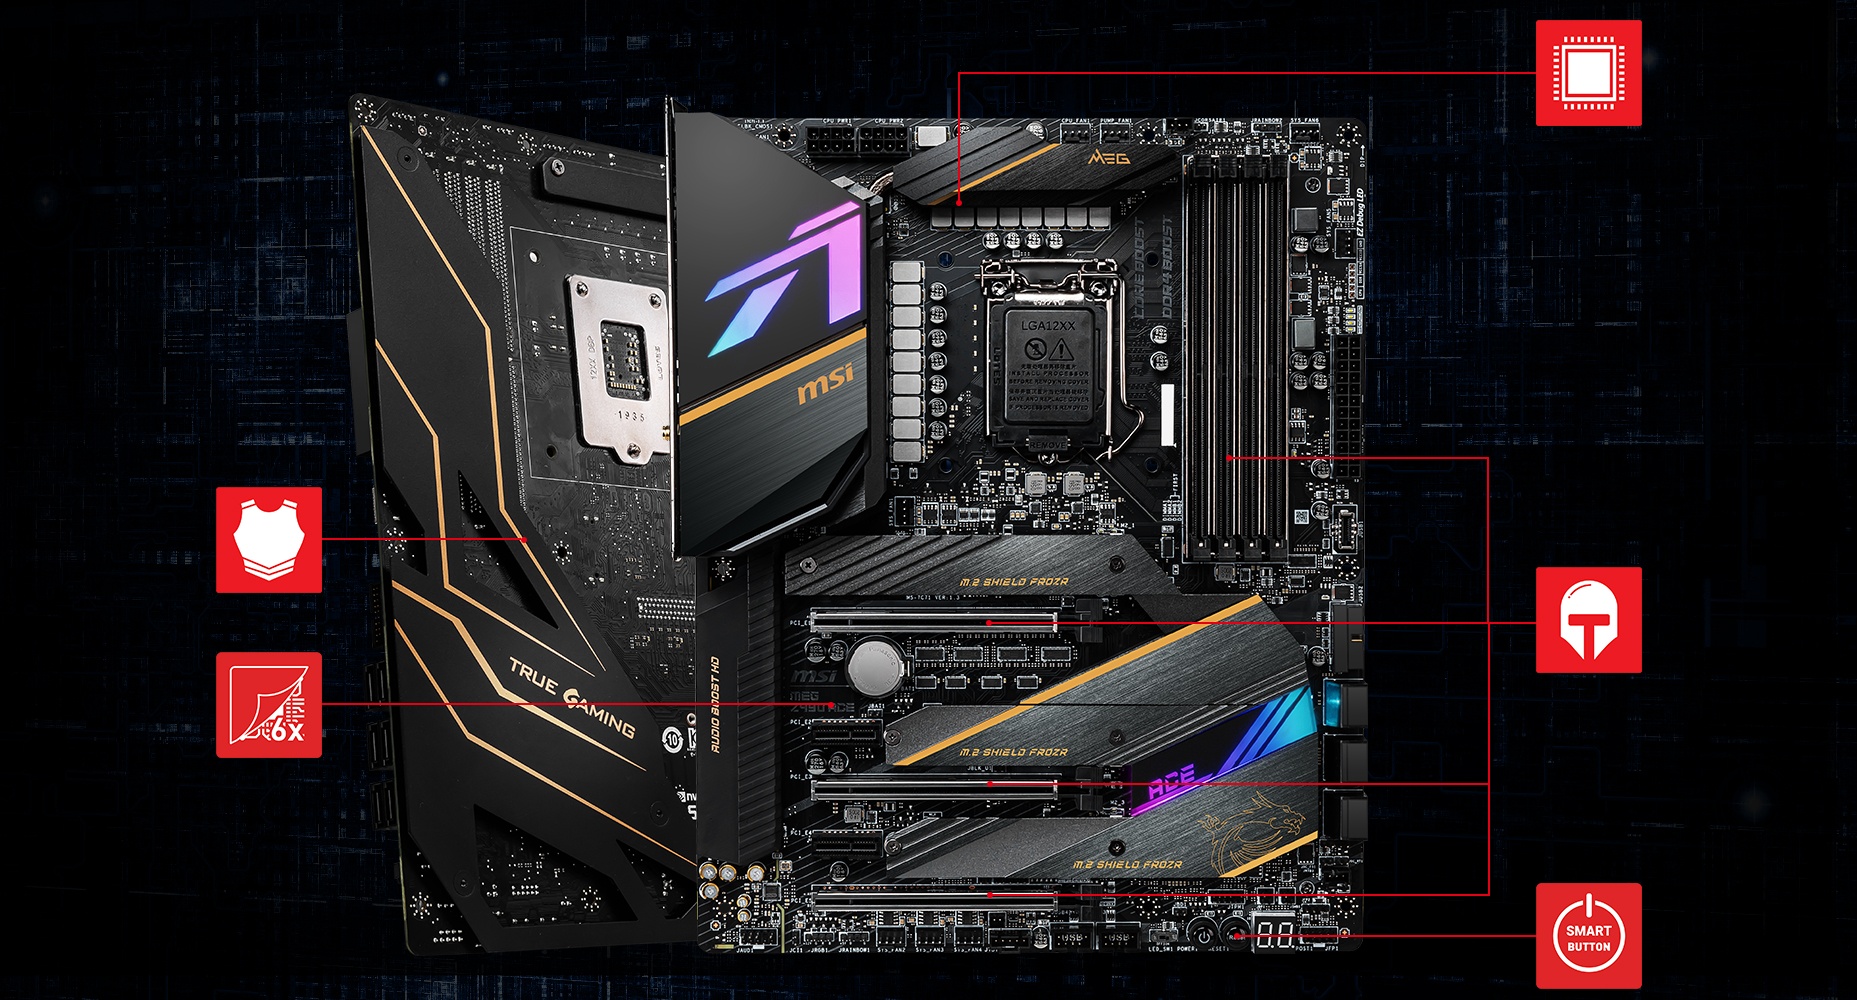 Creator z490 motherboard and a video card